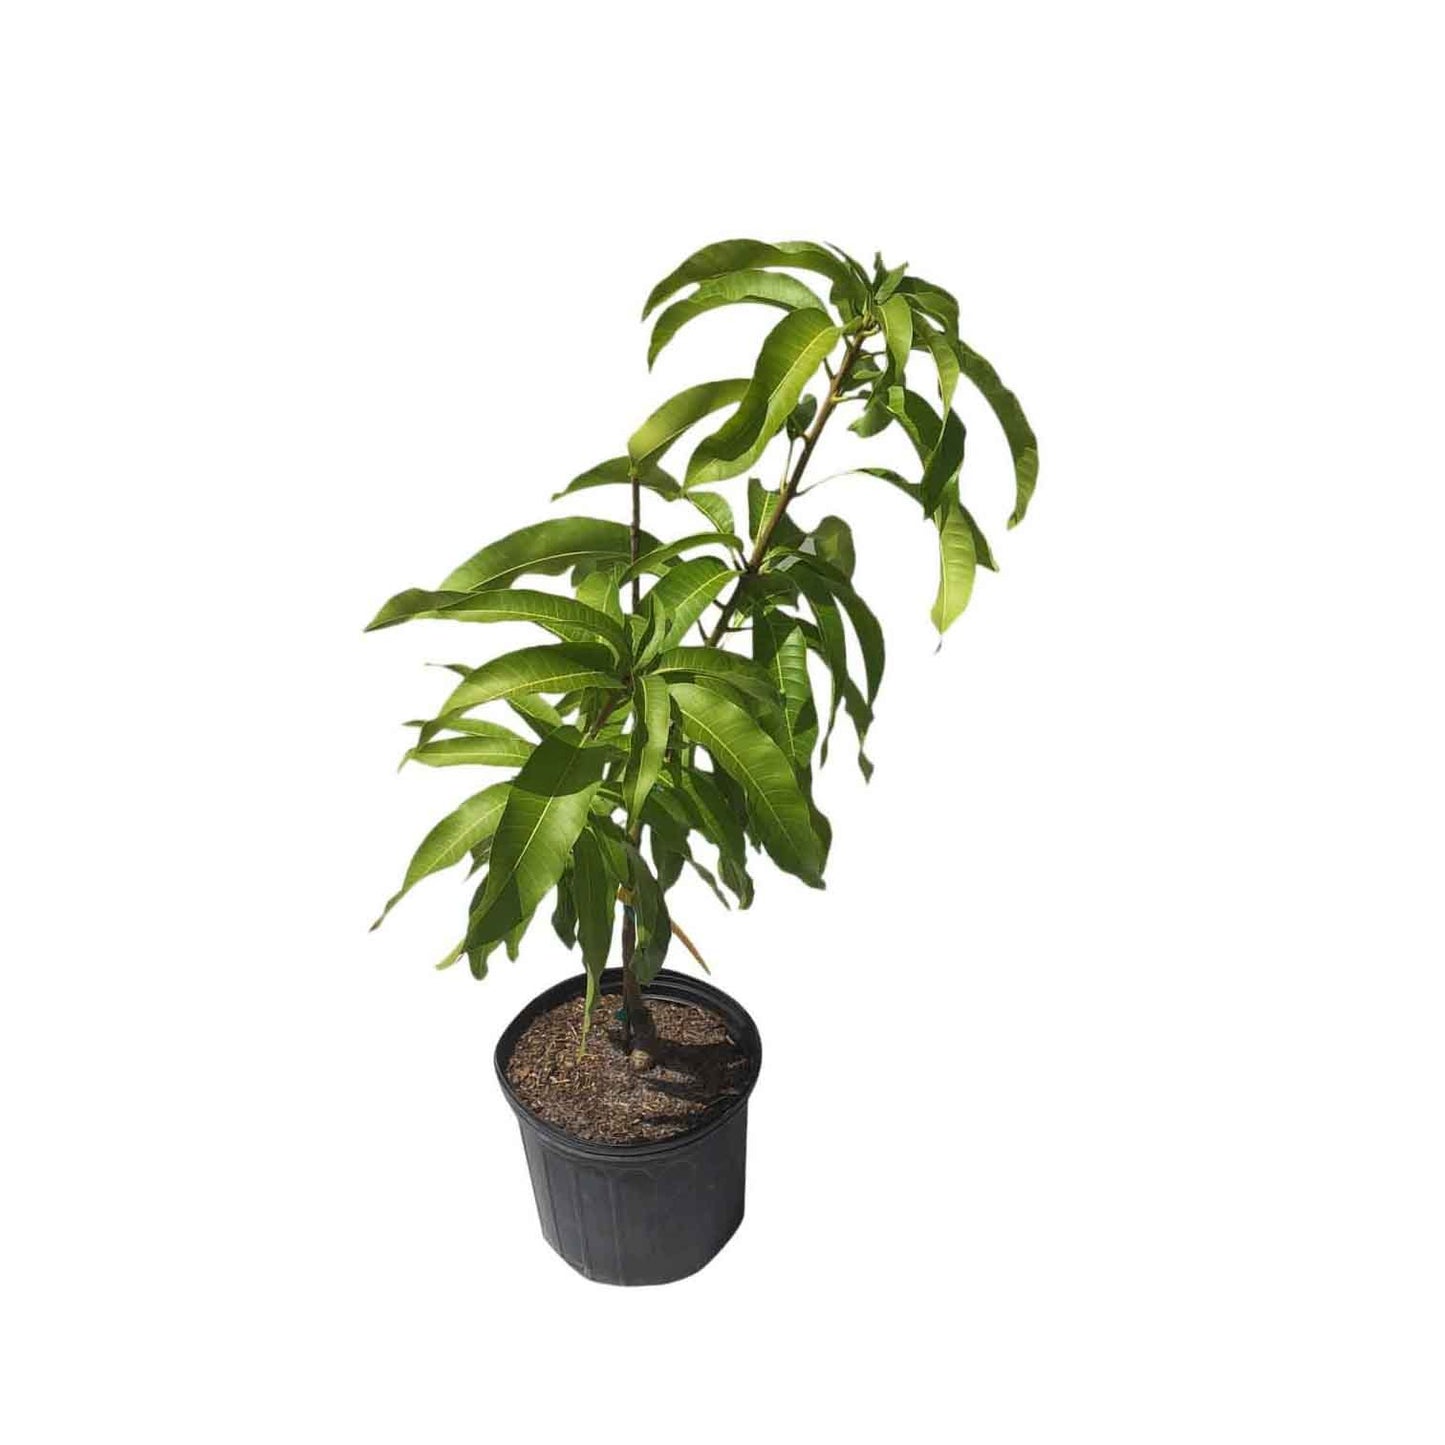 Coconut Cream Mango Tree, Grafted, 3-Gal Container from Florida